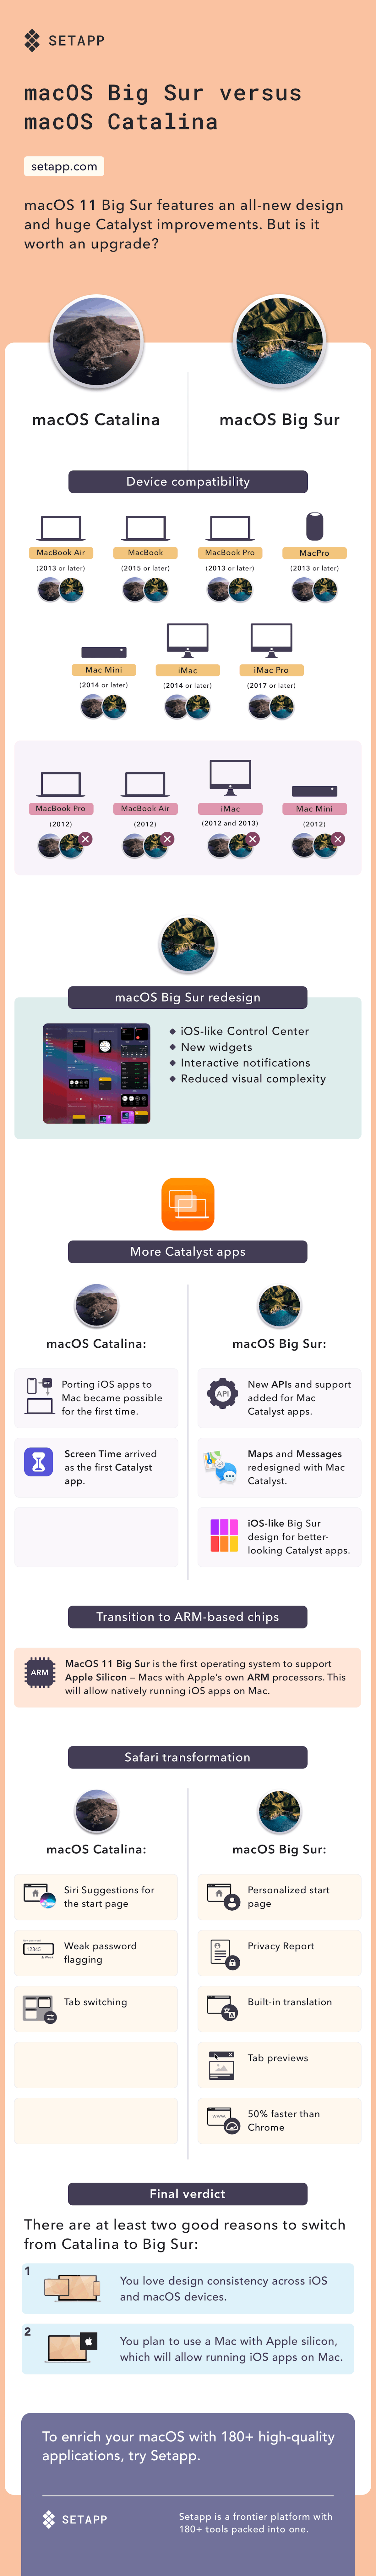 Big Sur vs Catalina: Detailed review and infographic